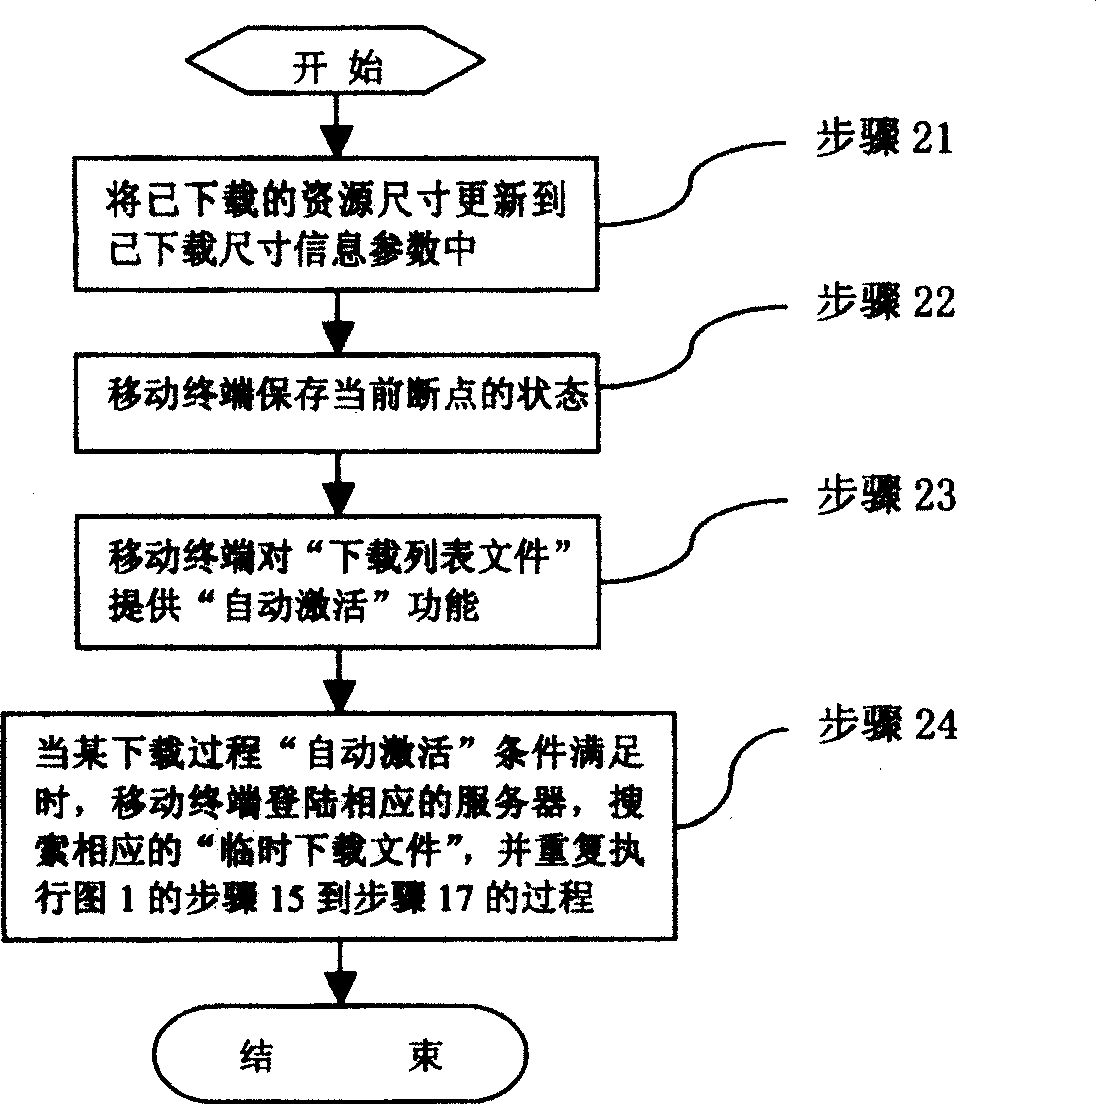 Method for down loading network resource using mobile terminal